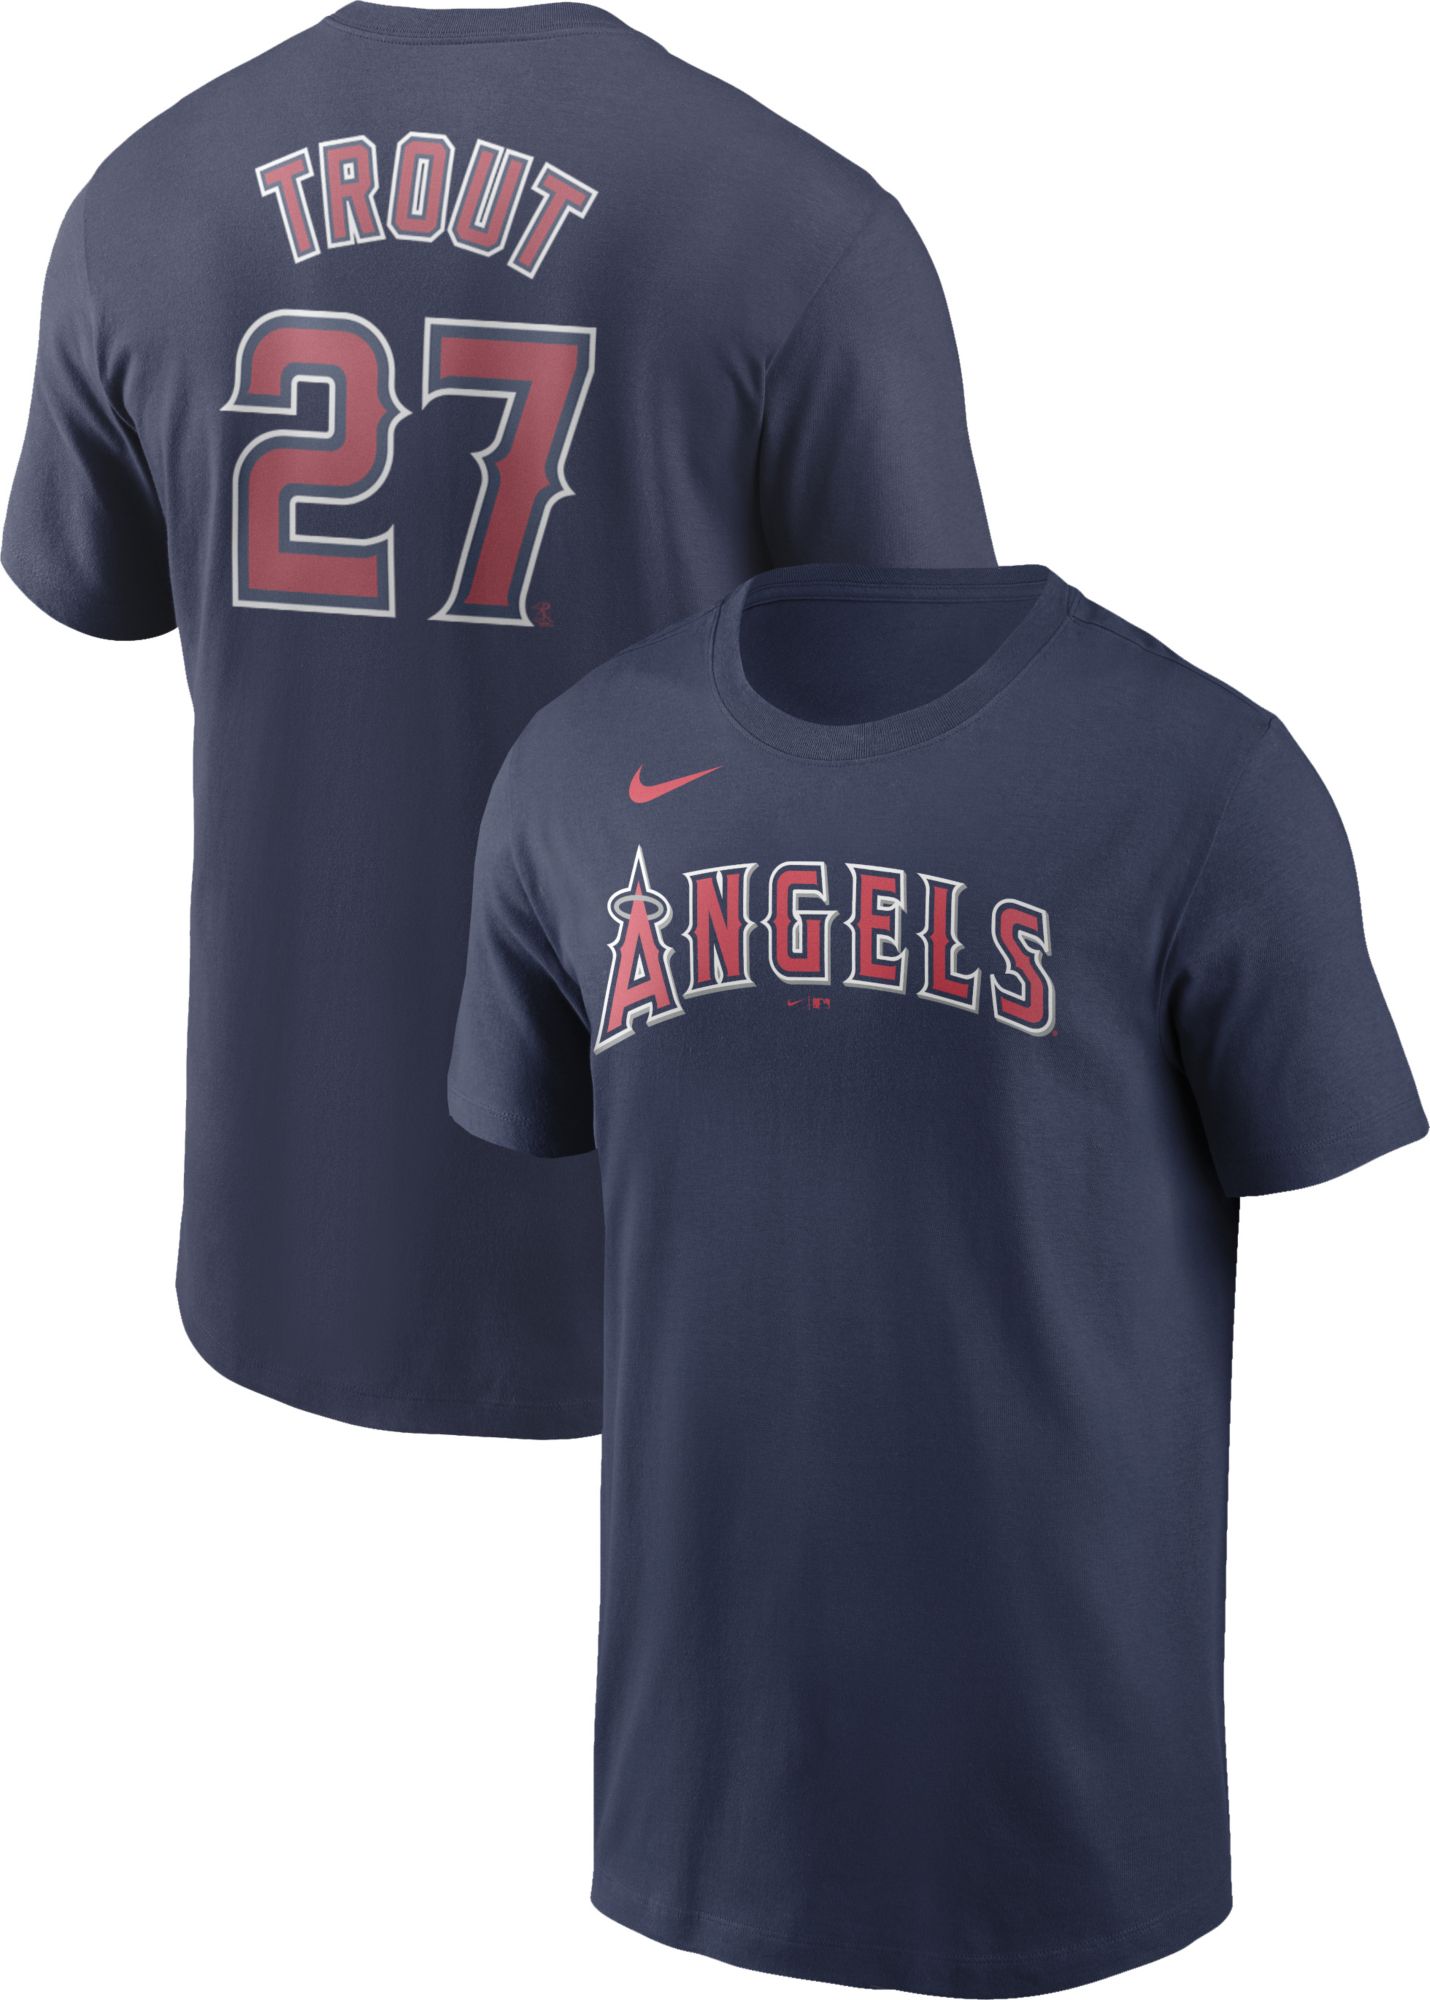 men's mike trout jersey